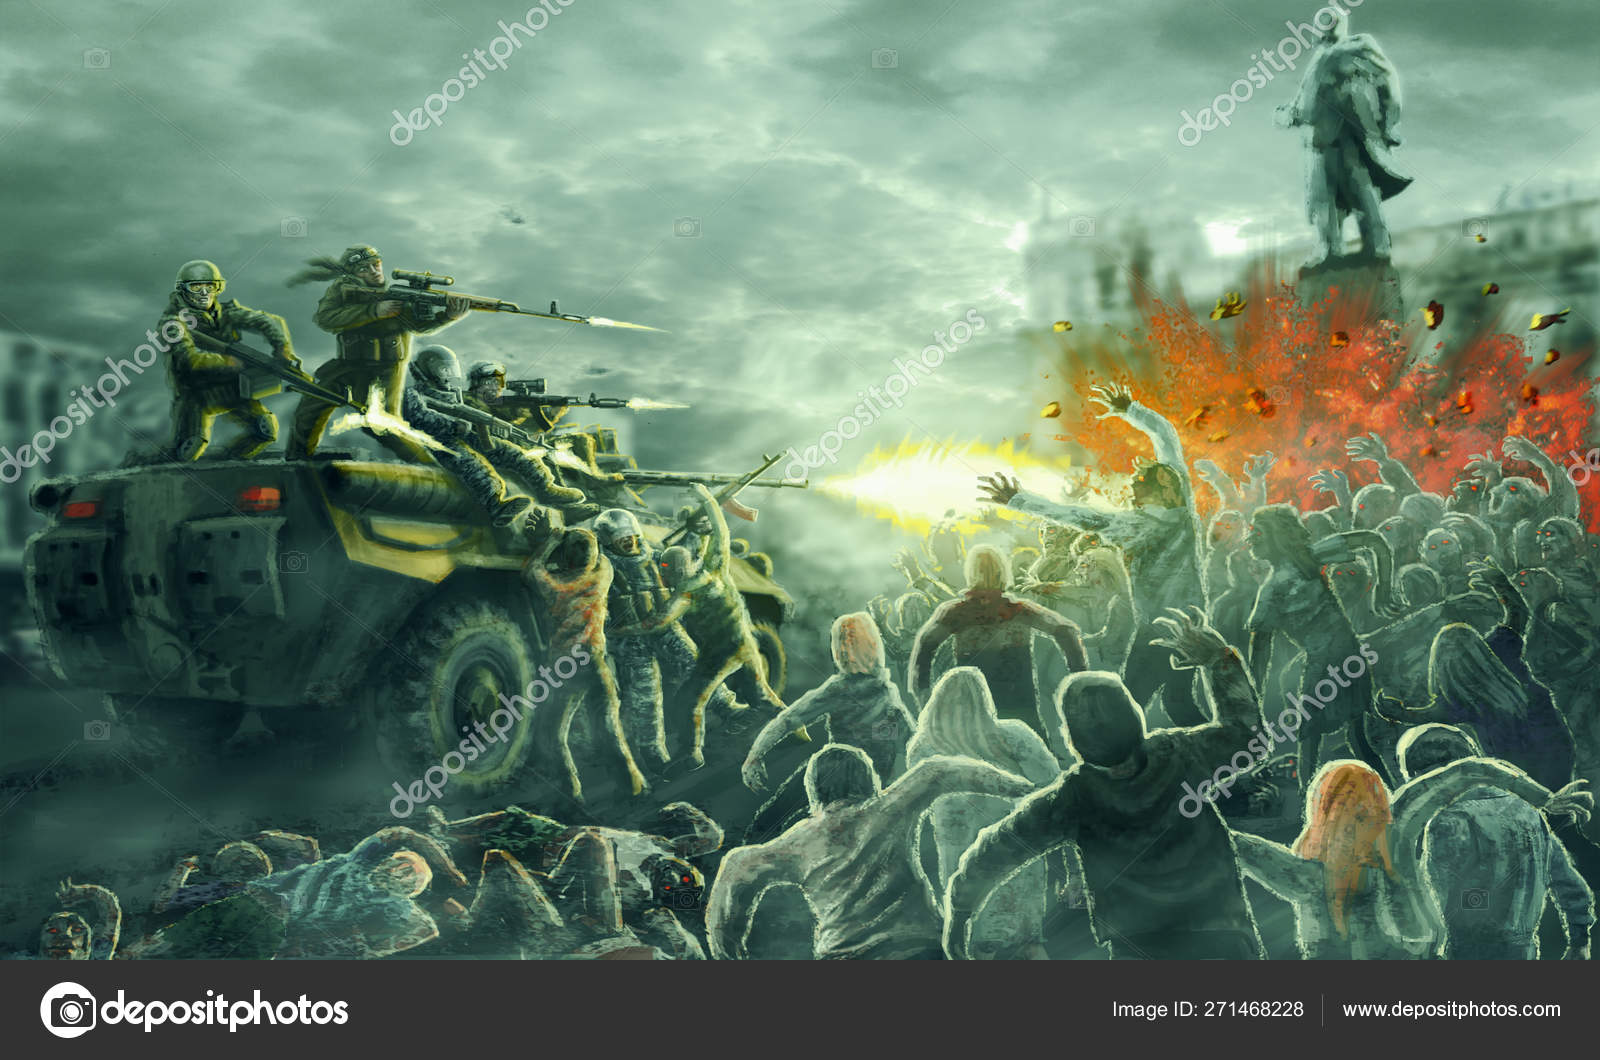 Undead army Stock Photos, Royalty Free Undead army Images | Depositphotos